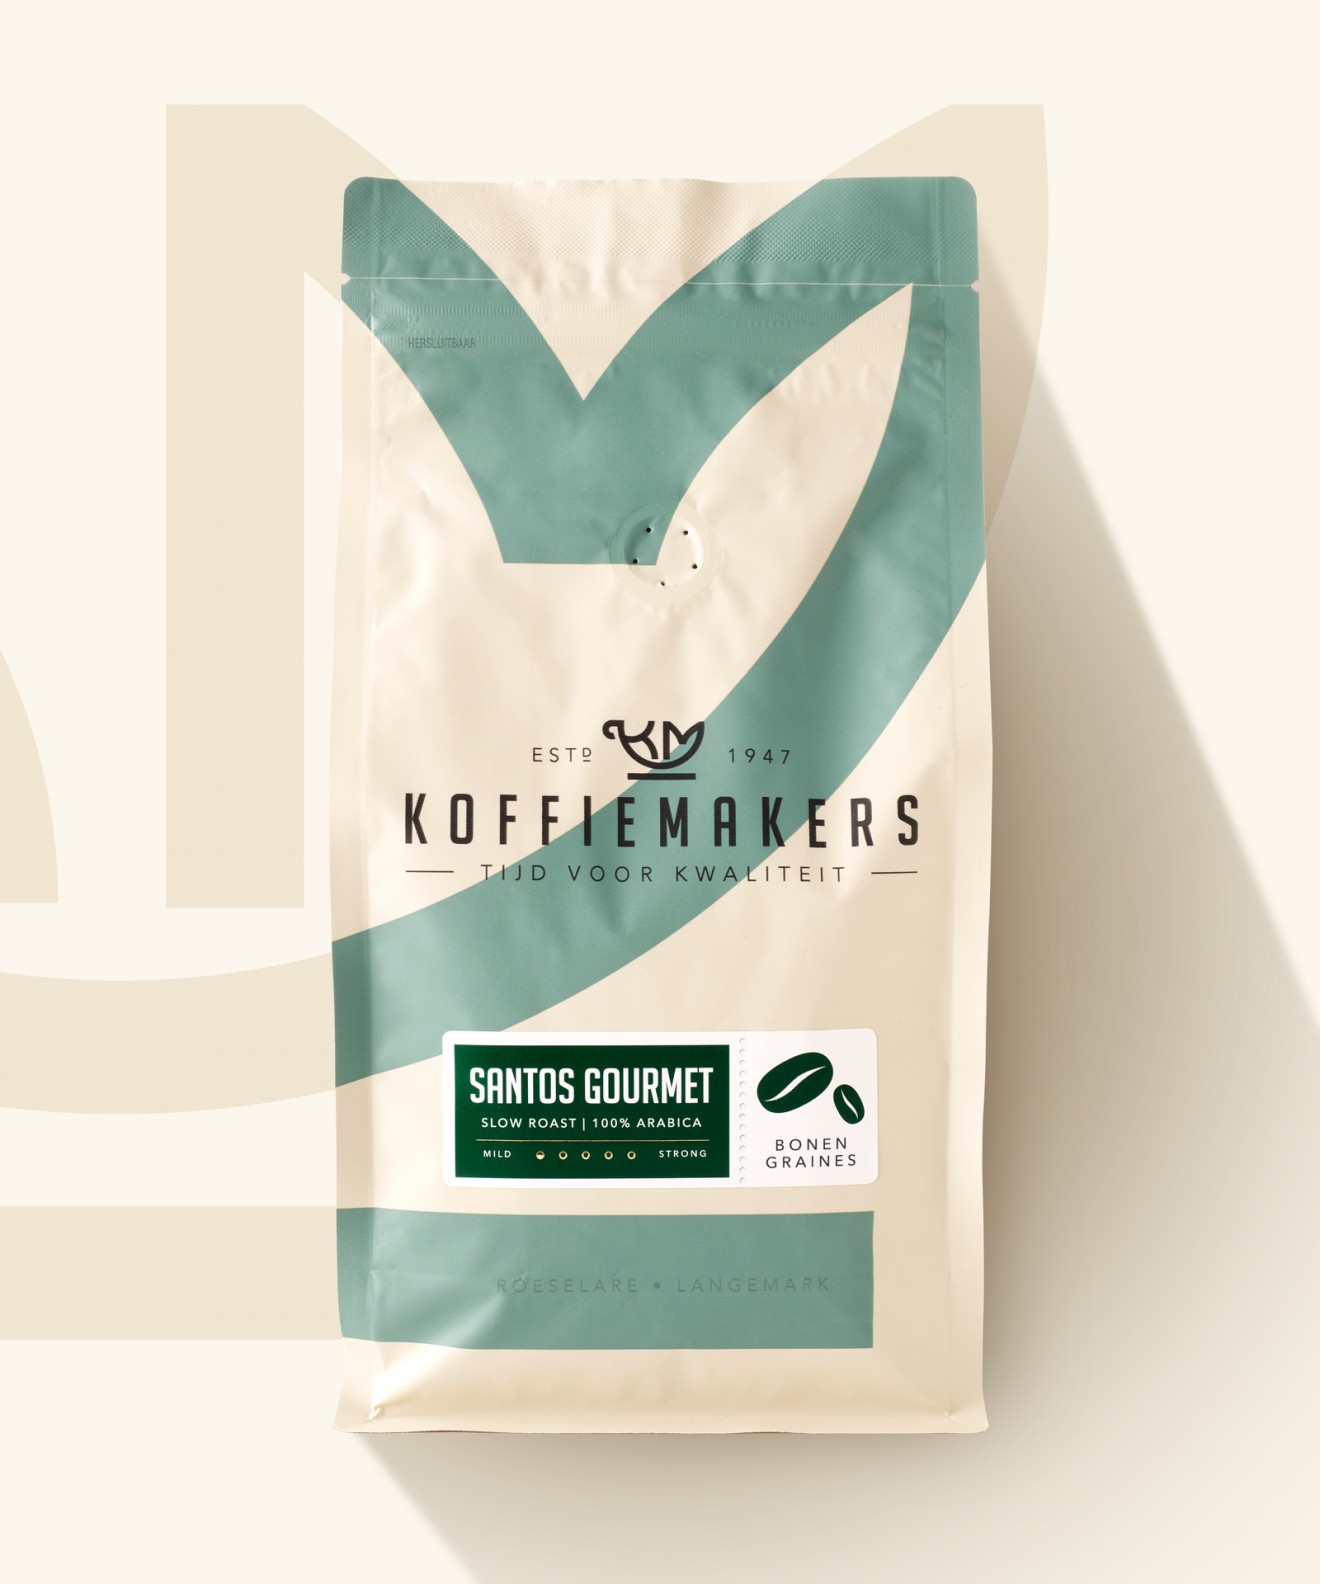 Quatre Mains package design - Coffee packaging identity for Koffiemakers